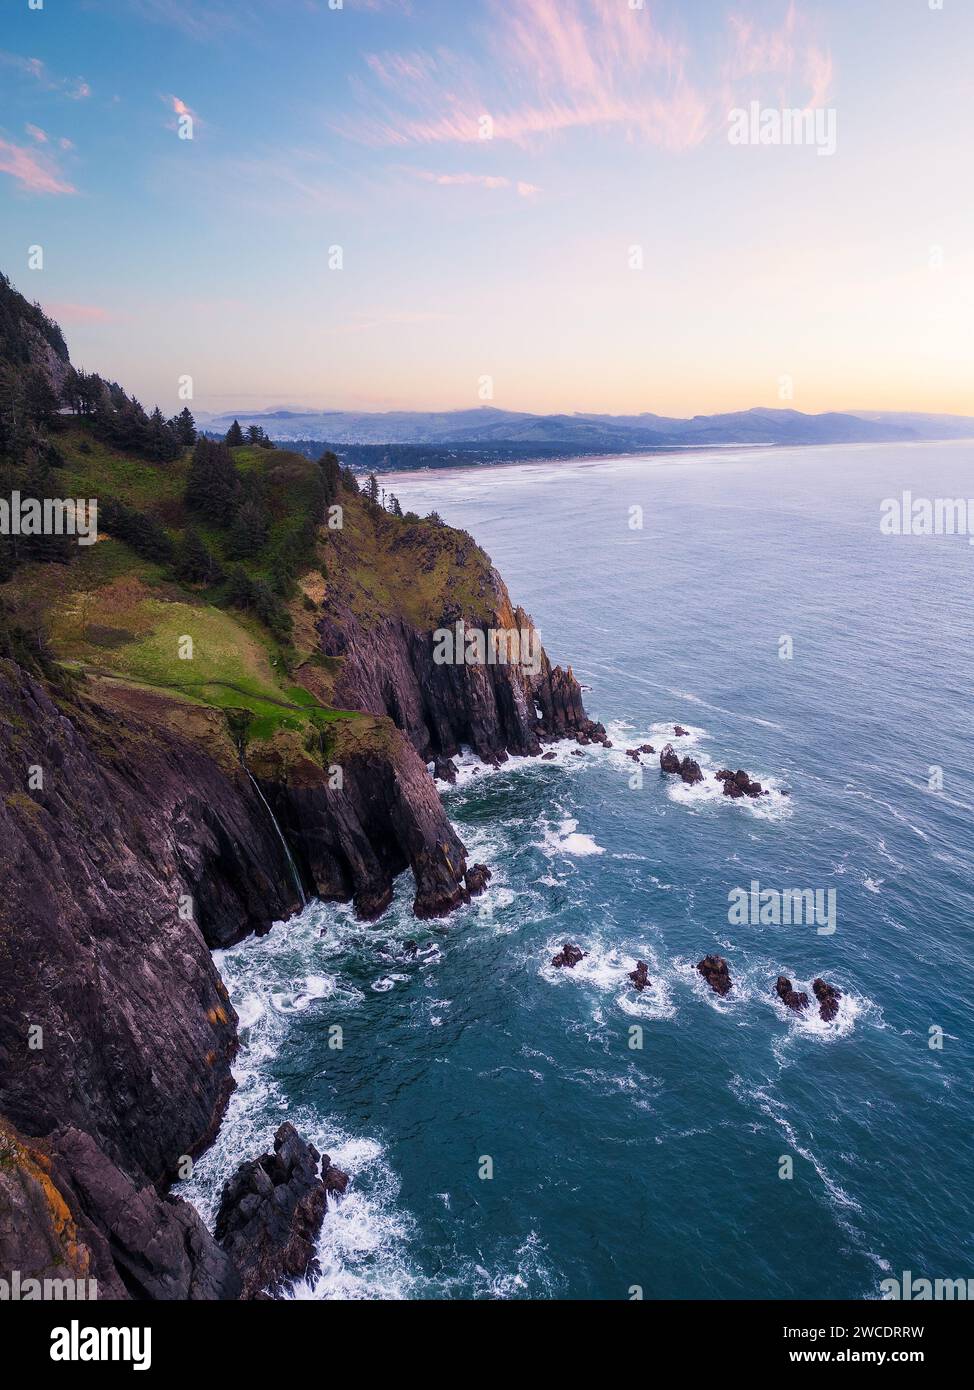 A fine art landscape photography image of Elk Flats along the Oregon Coast during a gorgeous and dynamic Spring sunset. Stock Photo